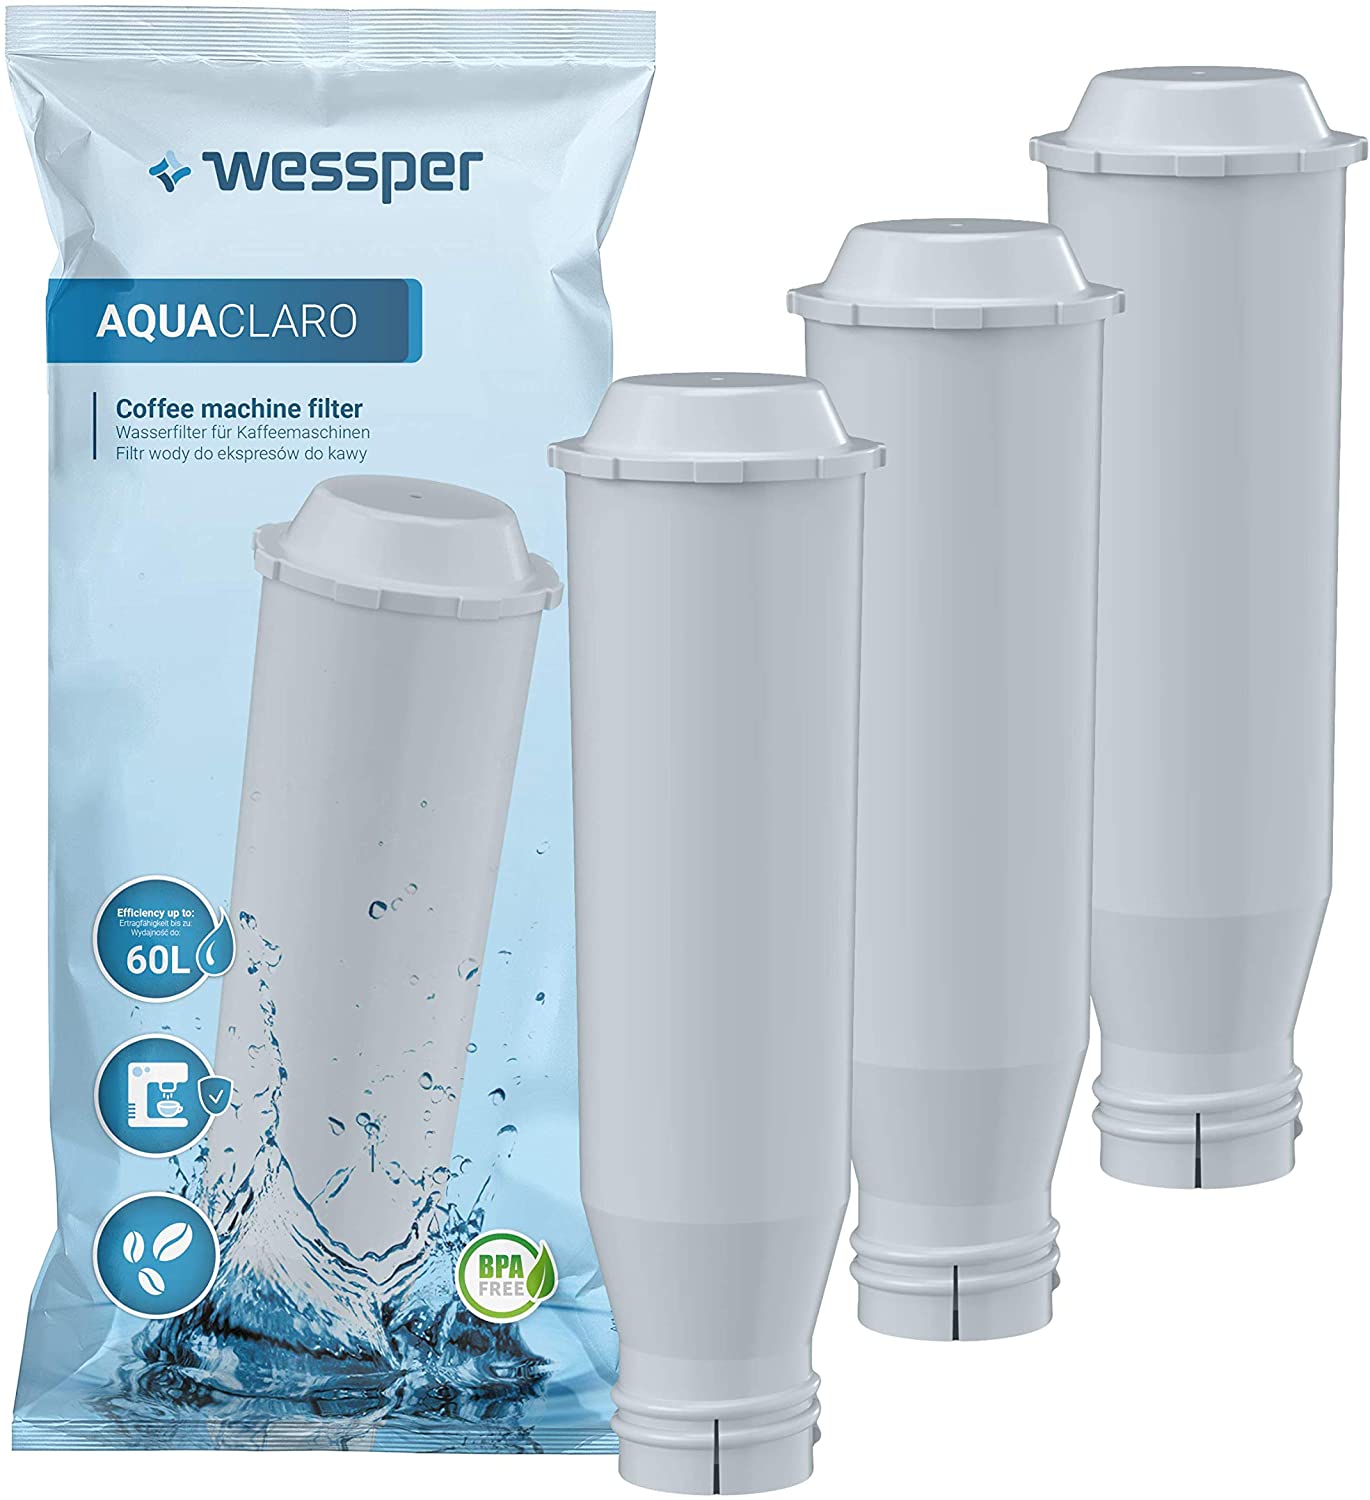 Wessper Water Filter Compatible with Krups Claris F088 F 088, Fits Many Models from Krups, Siemens, Bosch, AEG, Tefal, Neff, Gaggenau (Pack of 3)